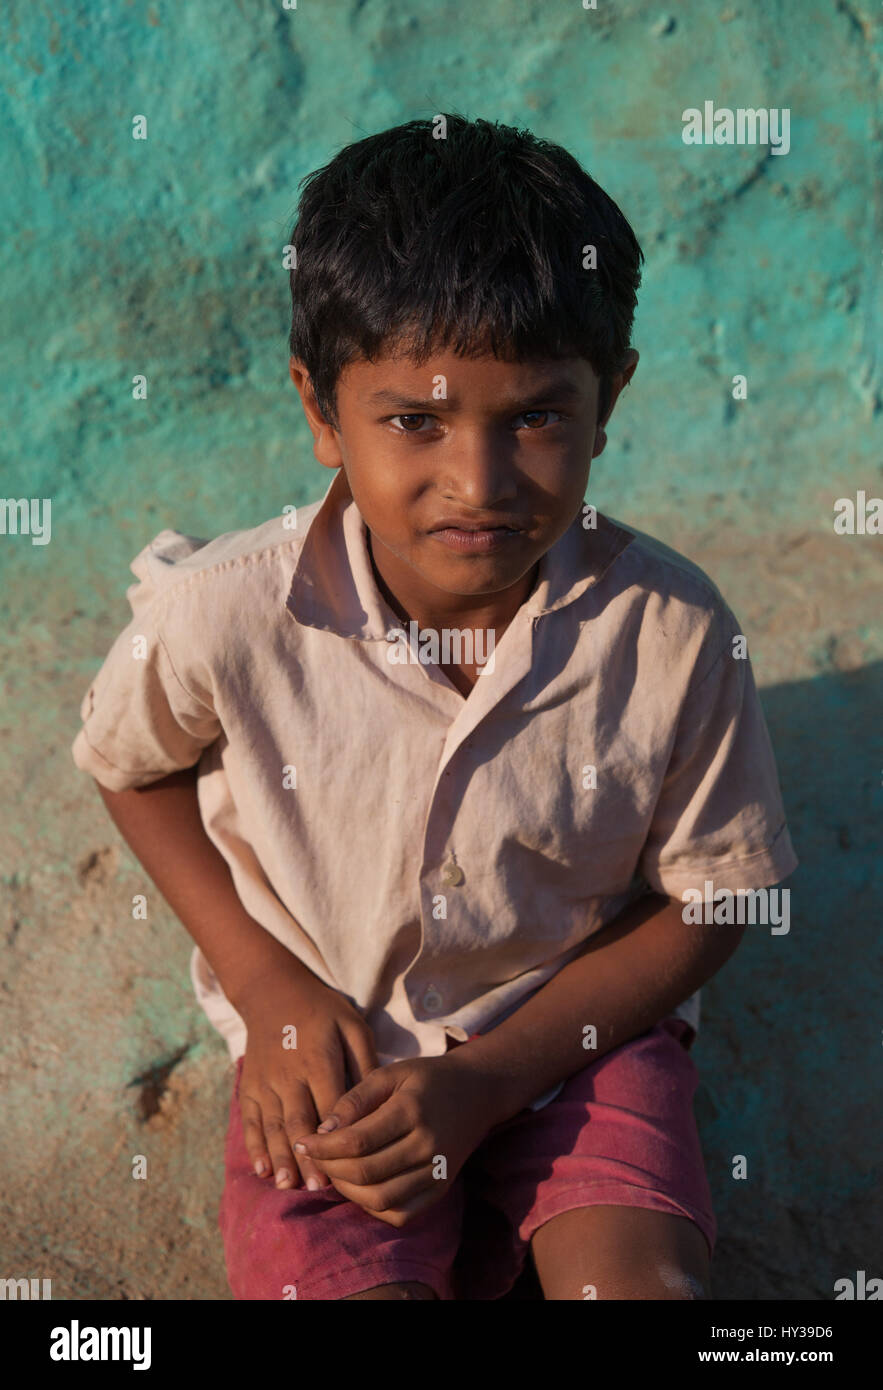 Portrait of a young boy in Koonthankulam, Tamil Nadu,India, Stock Photo